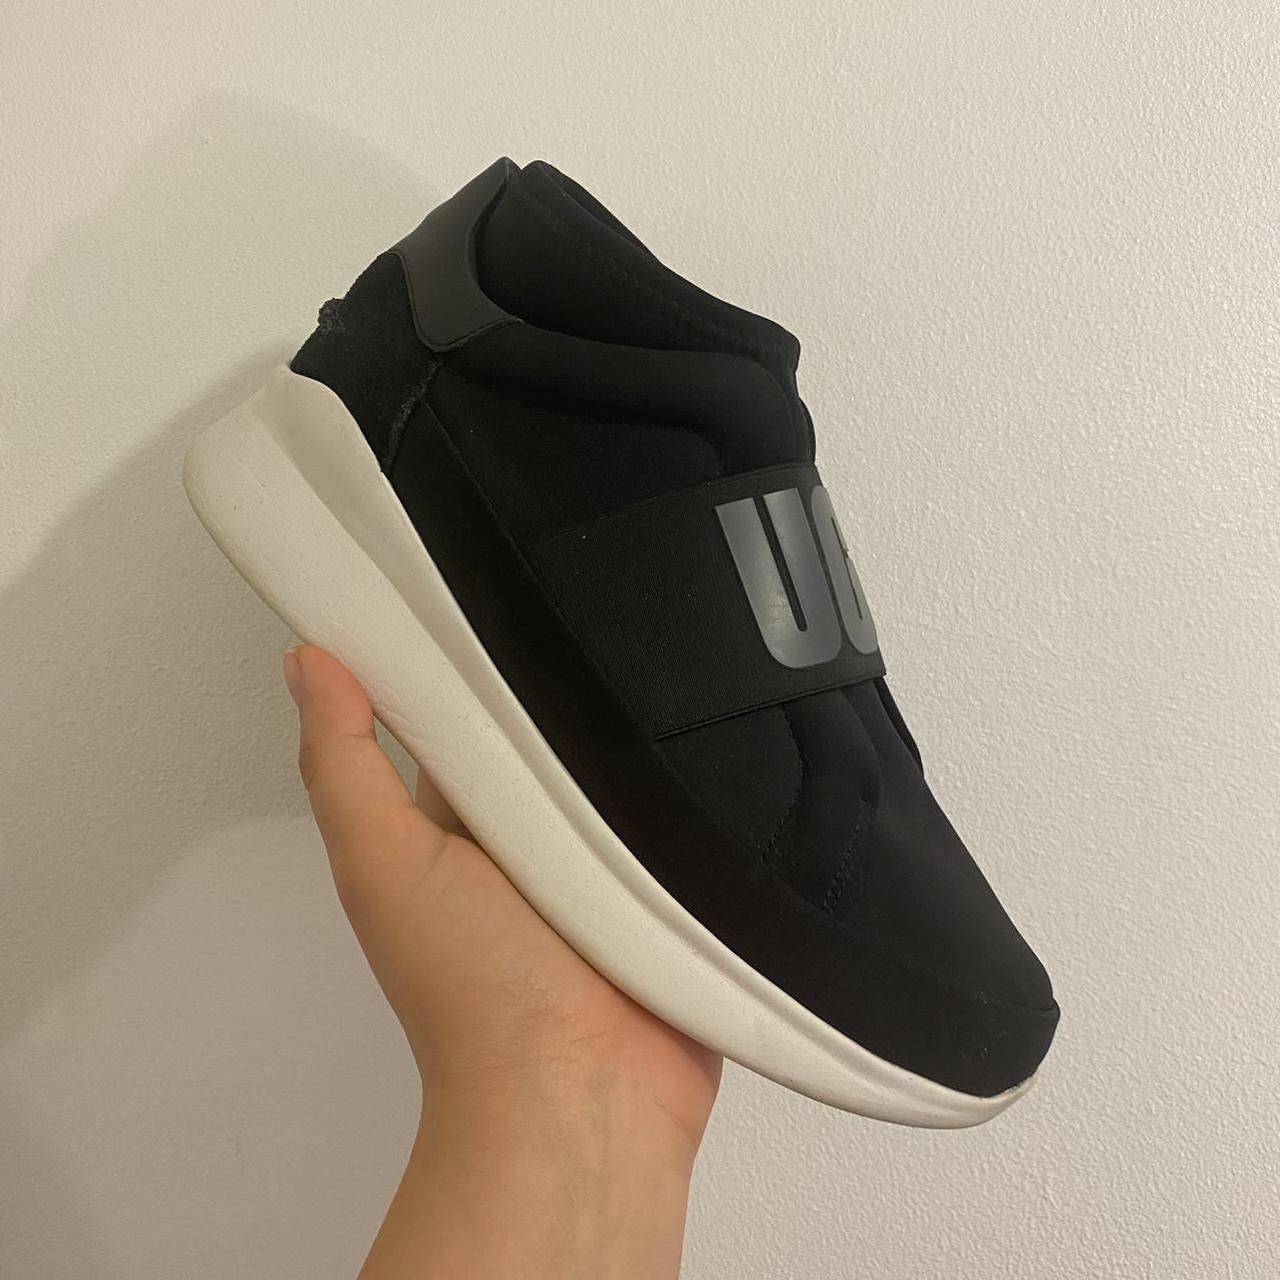 Product Image 1 - Black Ugg Slip-on Trainers 🖤
Very